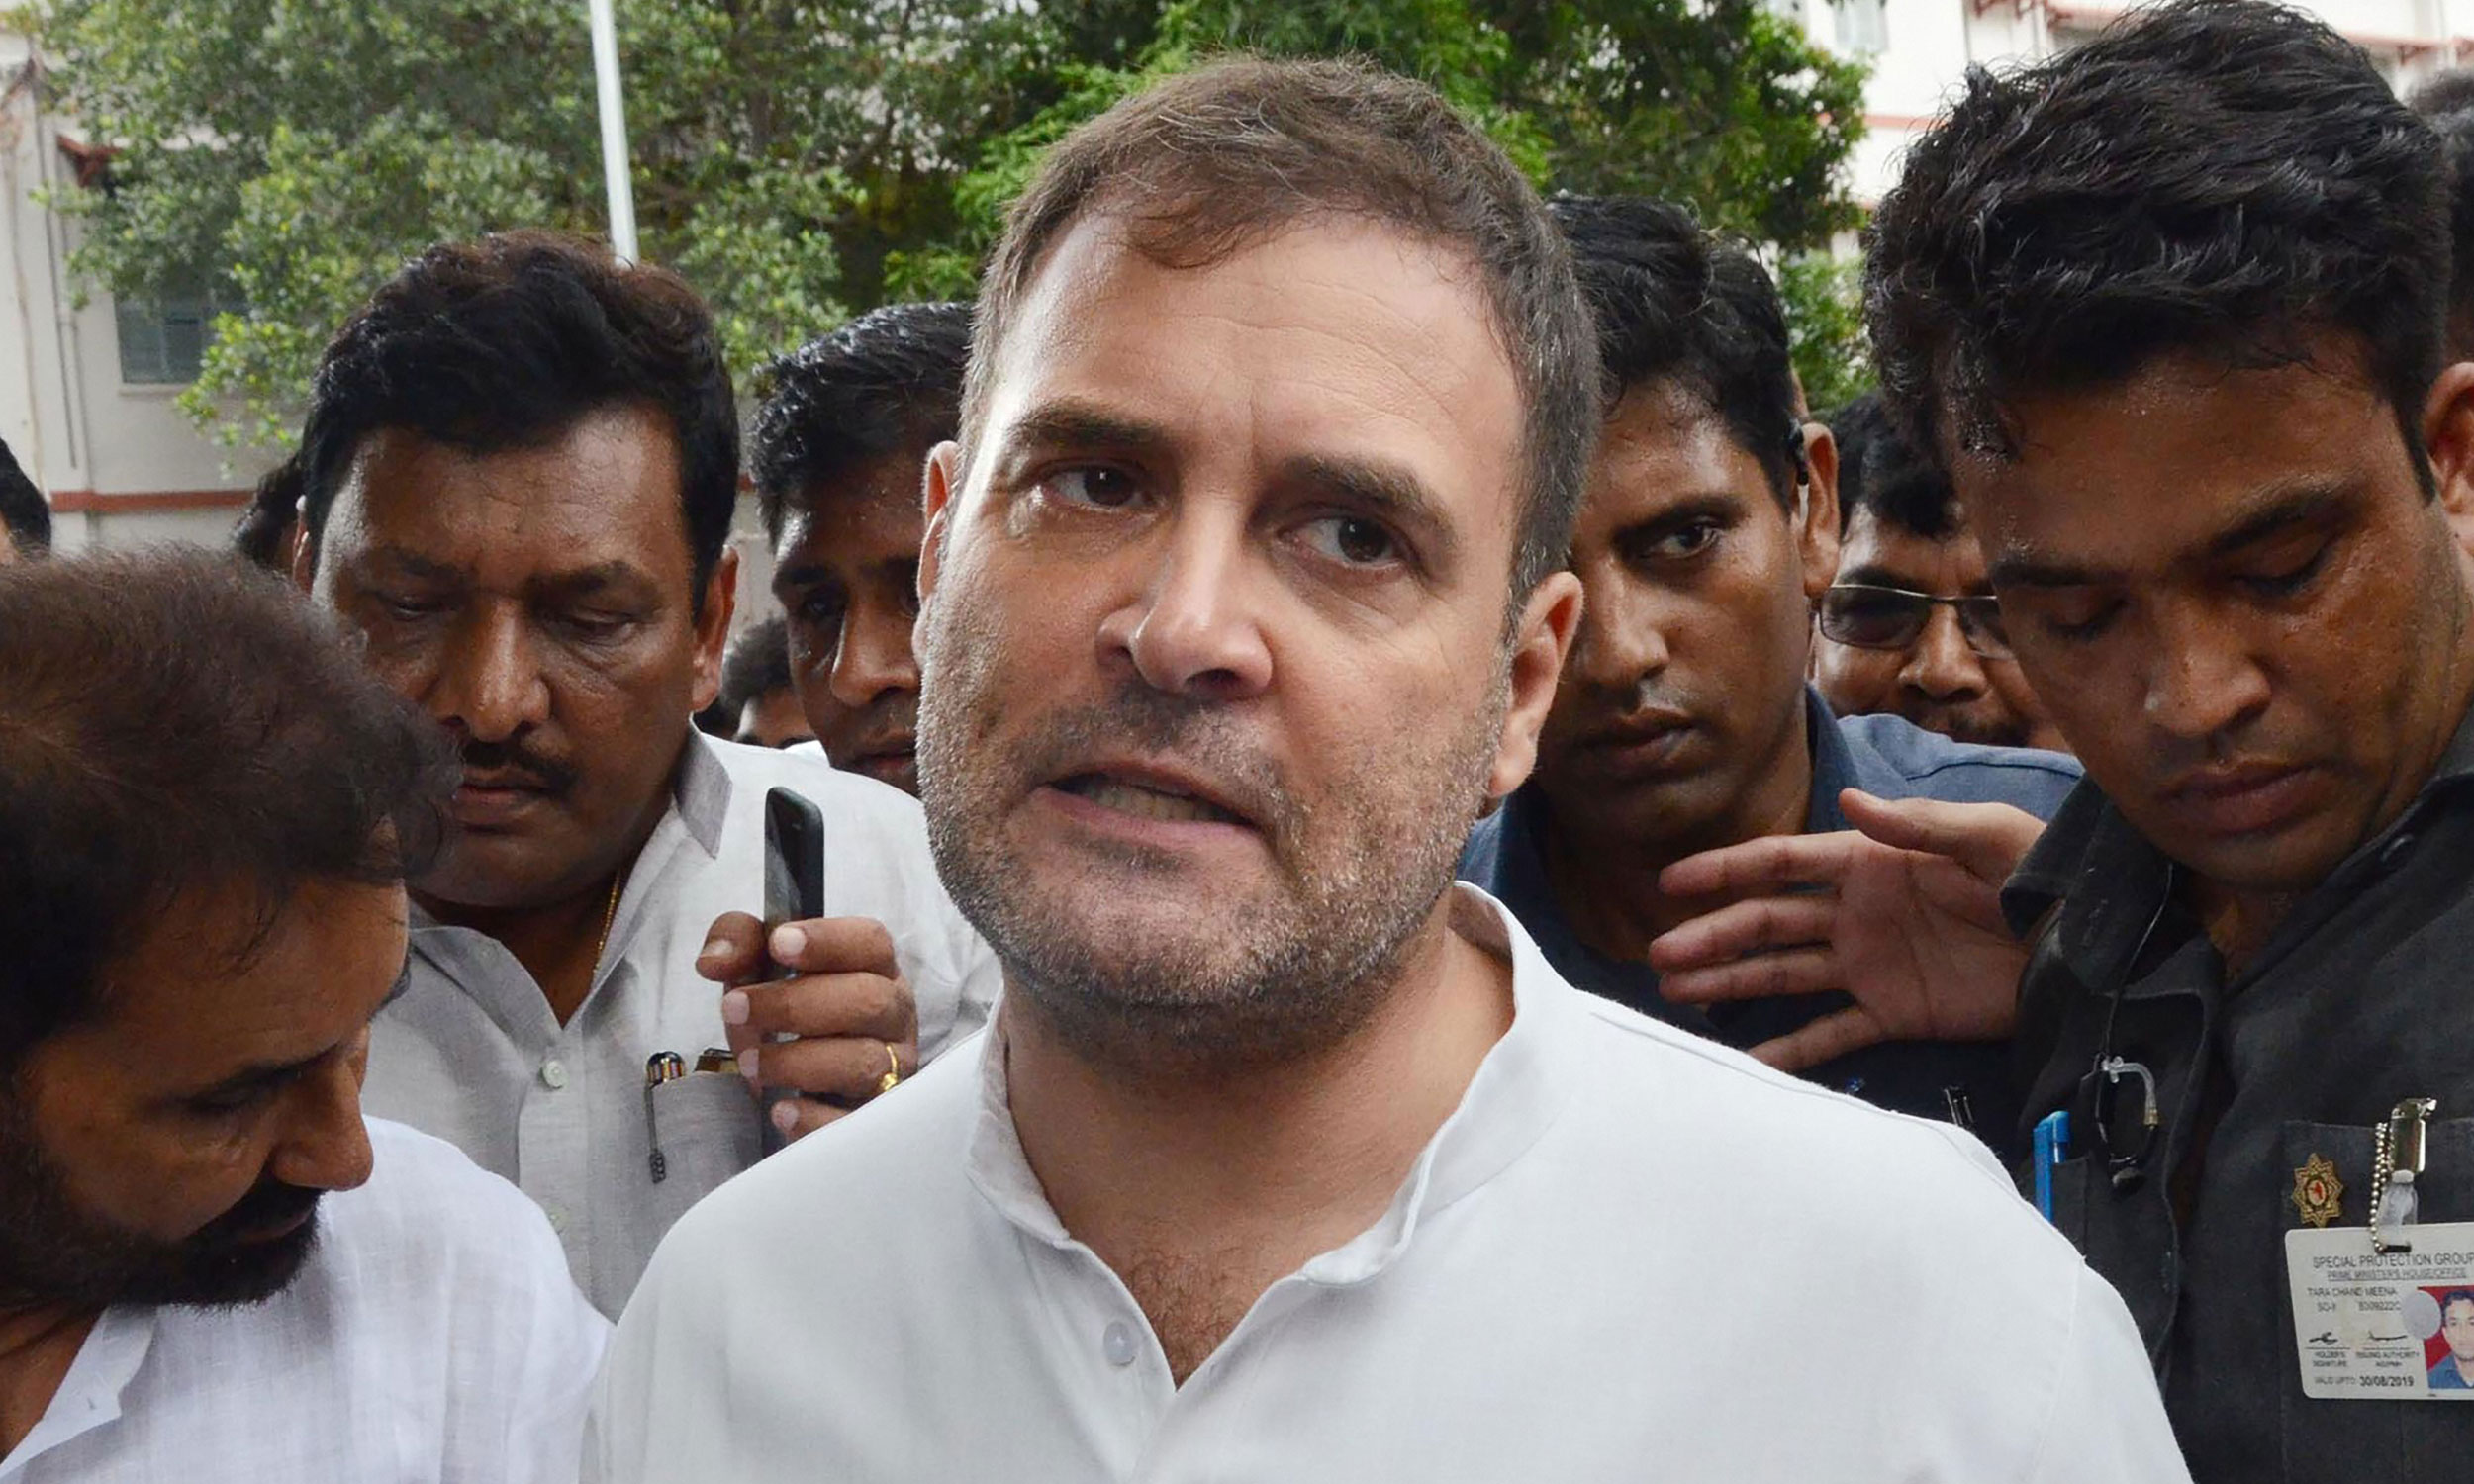 Rahul Gandhi: Not Congress president now, but will continue fighting